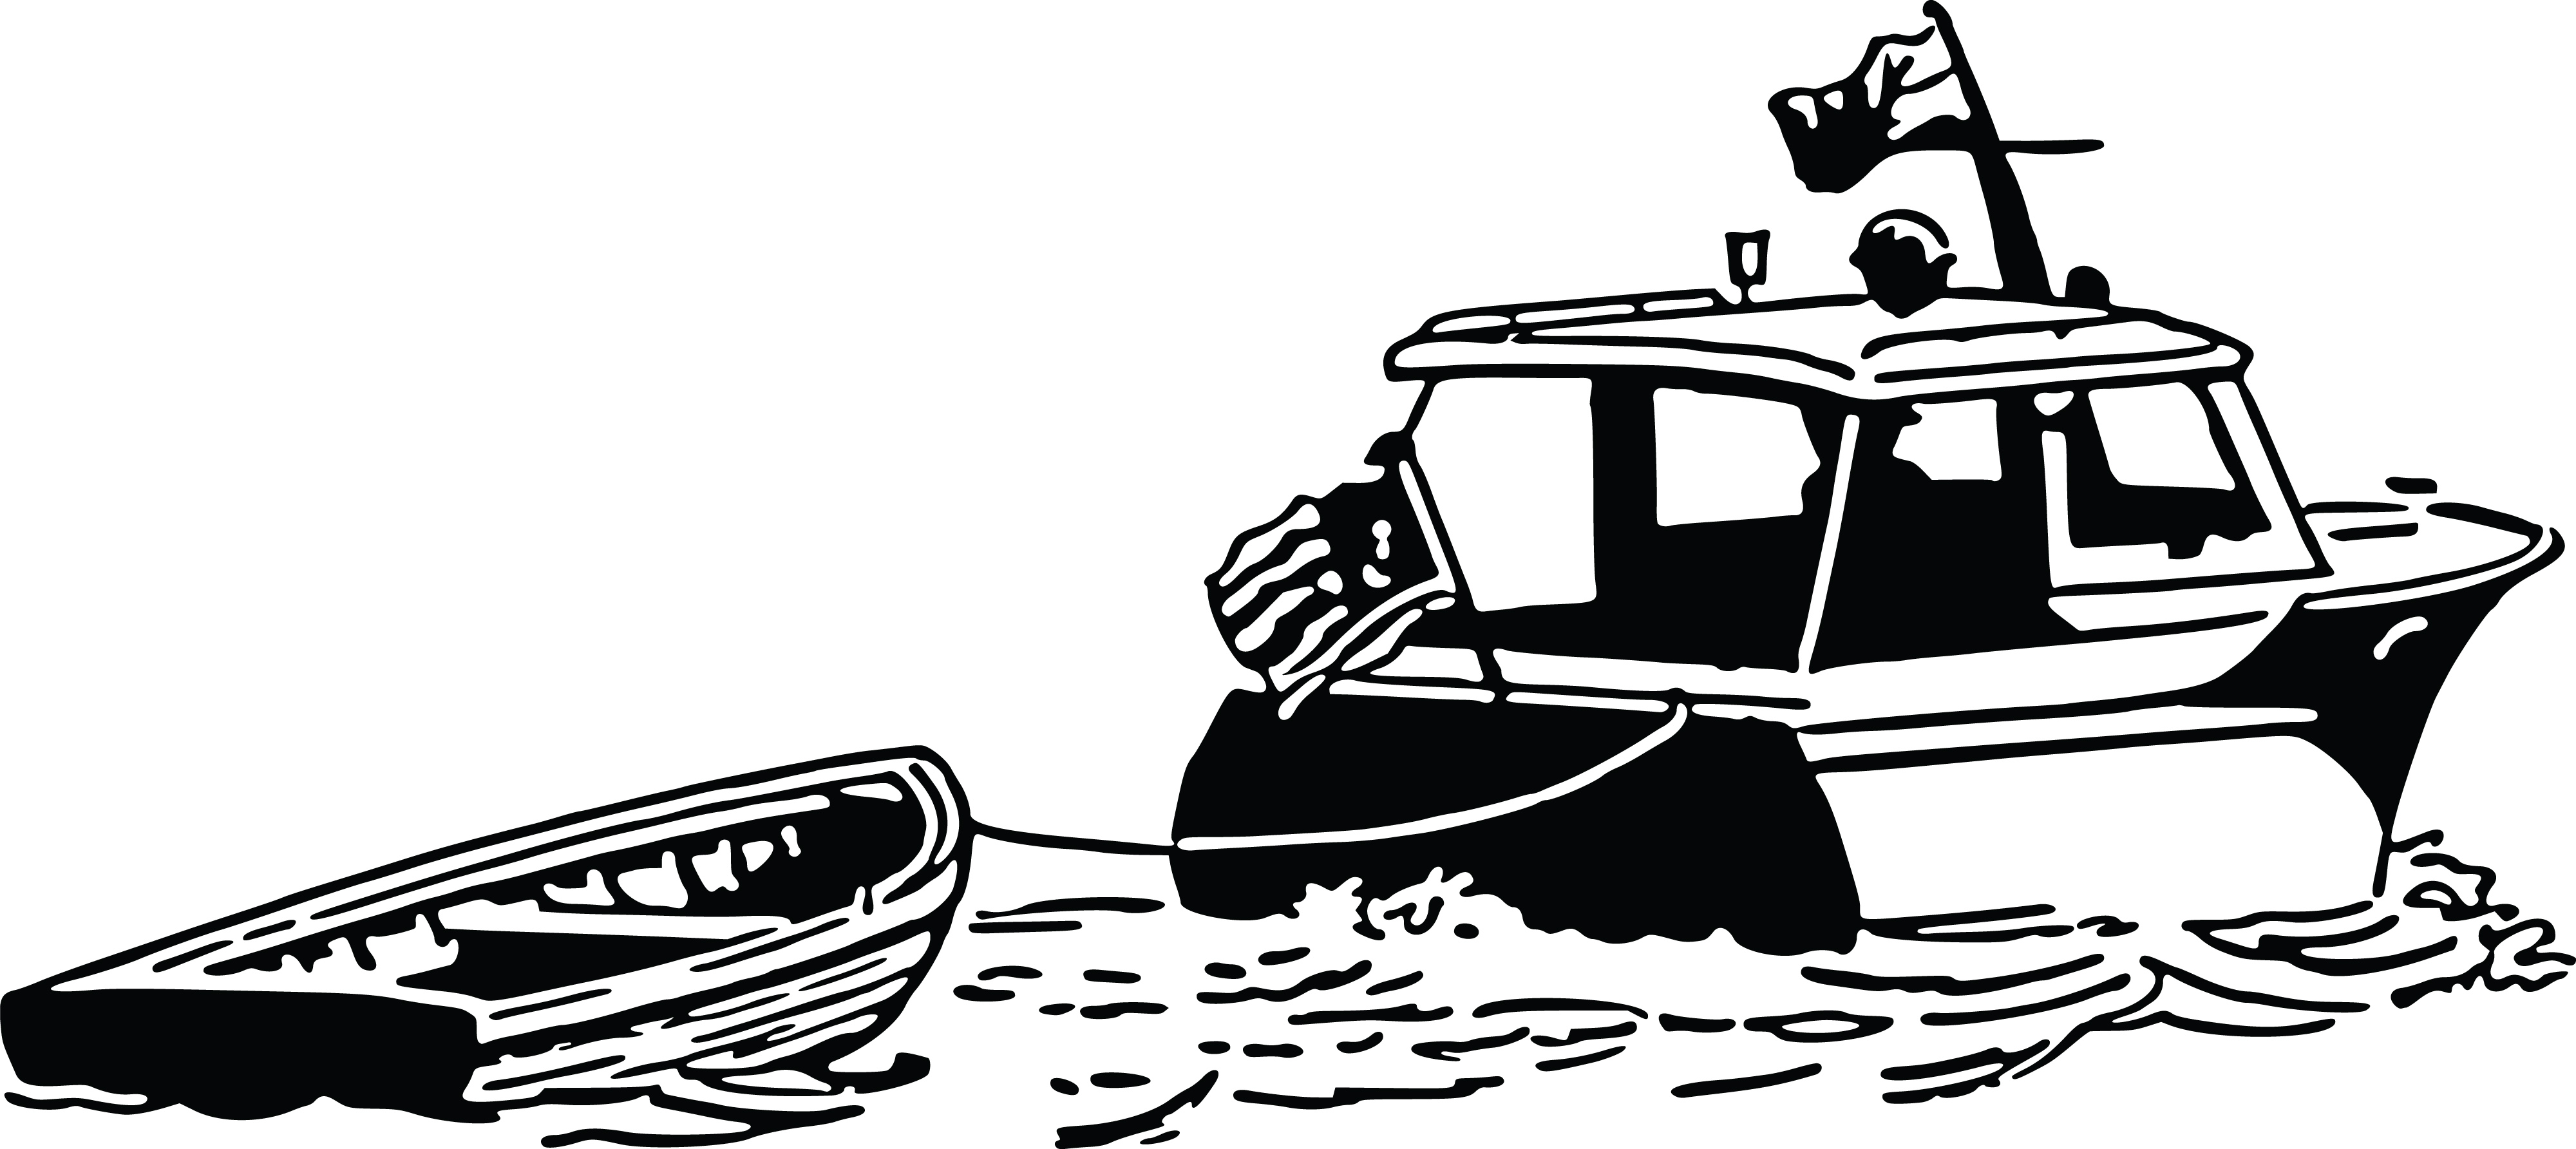 Download Free Clipart Of A Boat Pulling Another